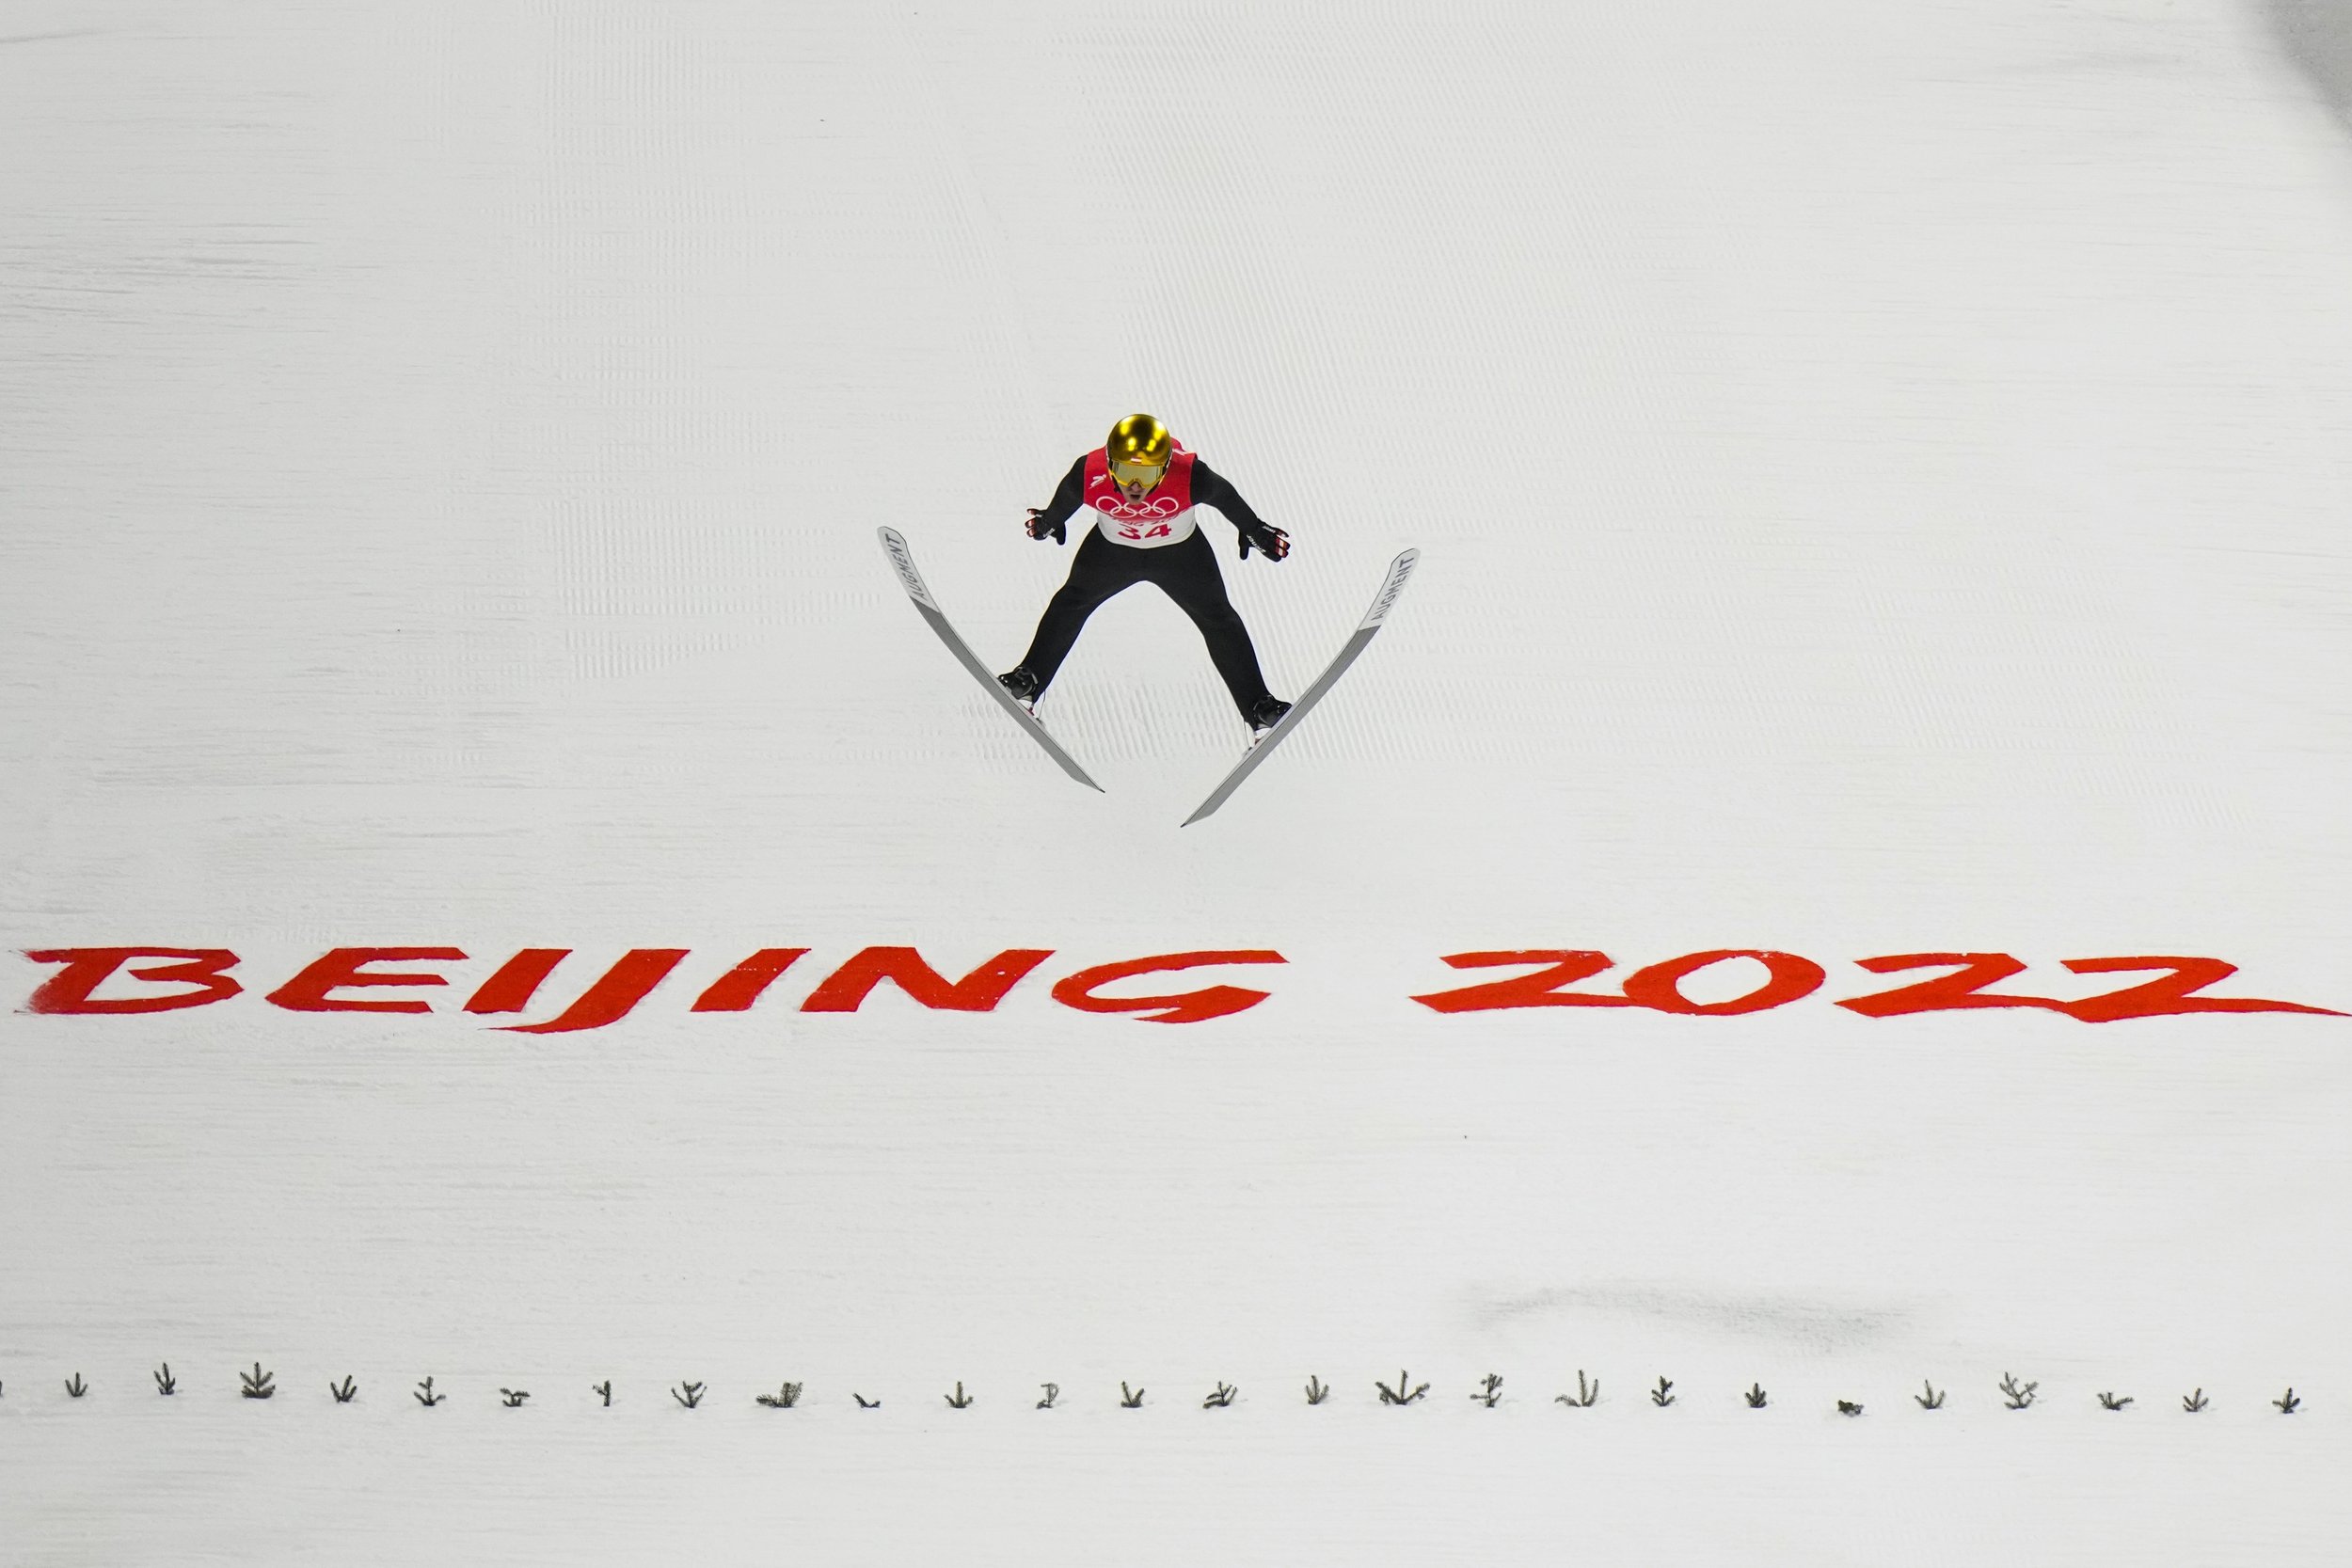  Manuel Fettner, of Austria, soars through the air during the men's normal hill individual ski jumping first round at the 2022 Winter Olympics, Sunday, Feb. 6, 2022, in Zhangjiakou, China. (AP Photo/Andrew Medichini) 